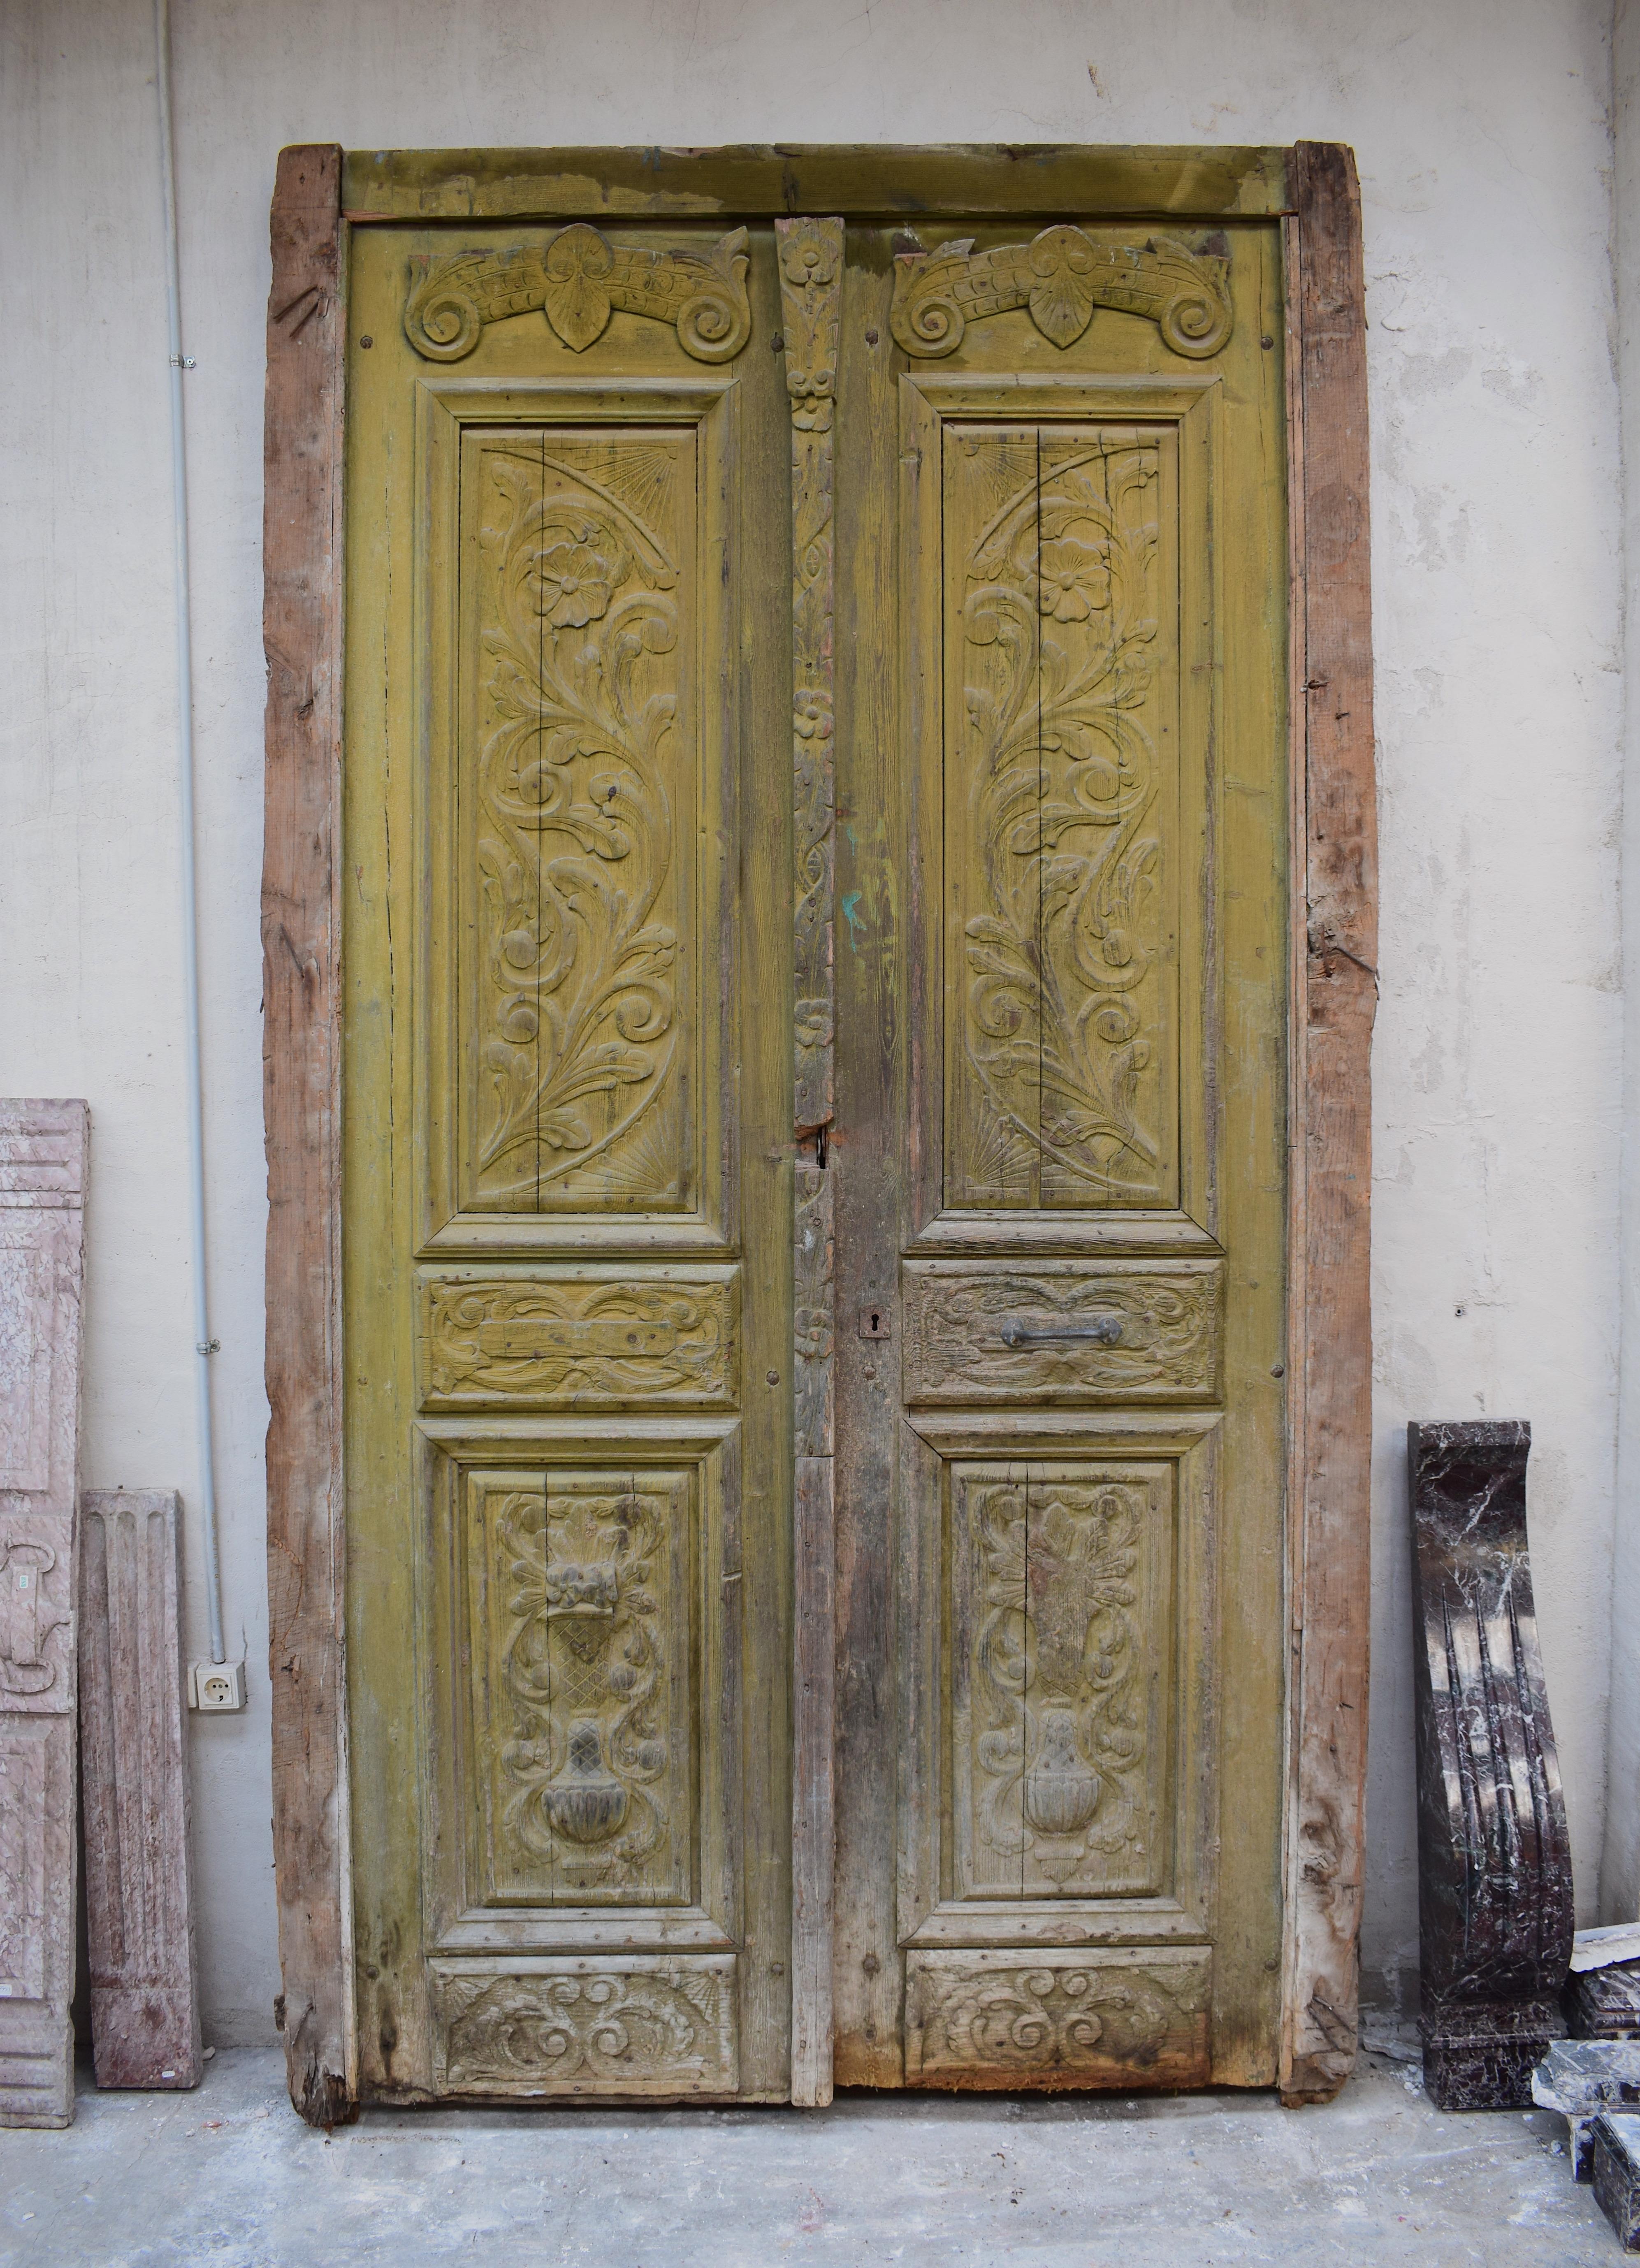 This set of large antique exterior doors have great hand crafted raw detail carved into each panel. They are from an old house and are architectural salvage. The doors have a beautiful green and yellow patina colour across their surfaces. Each door